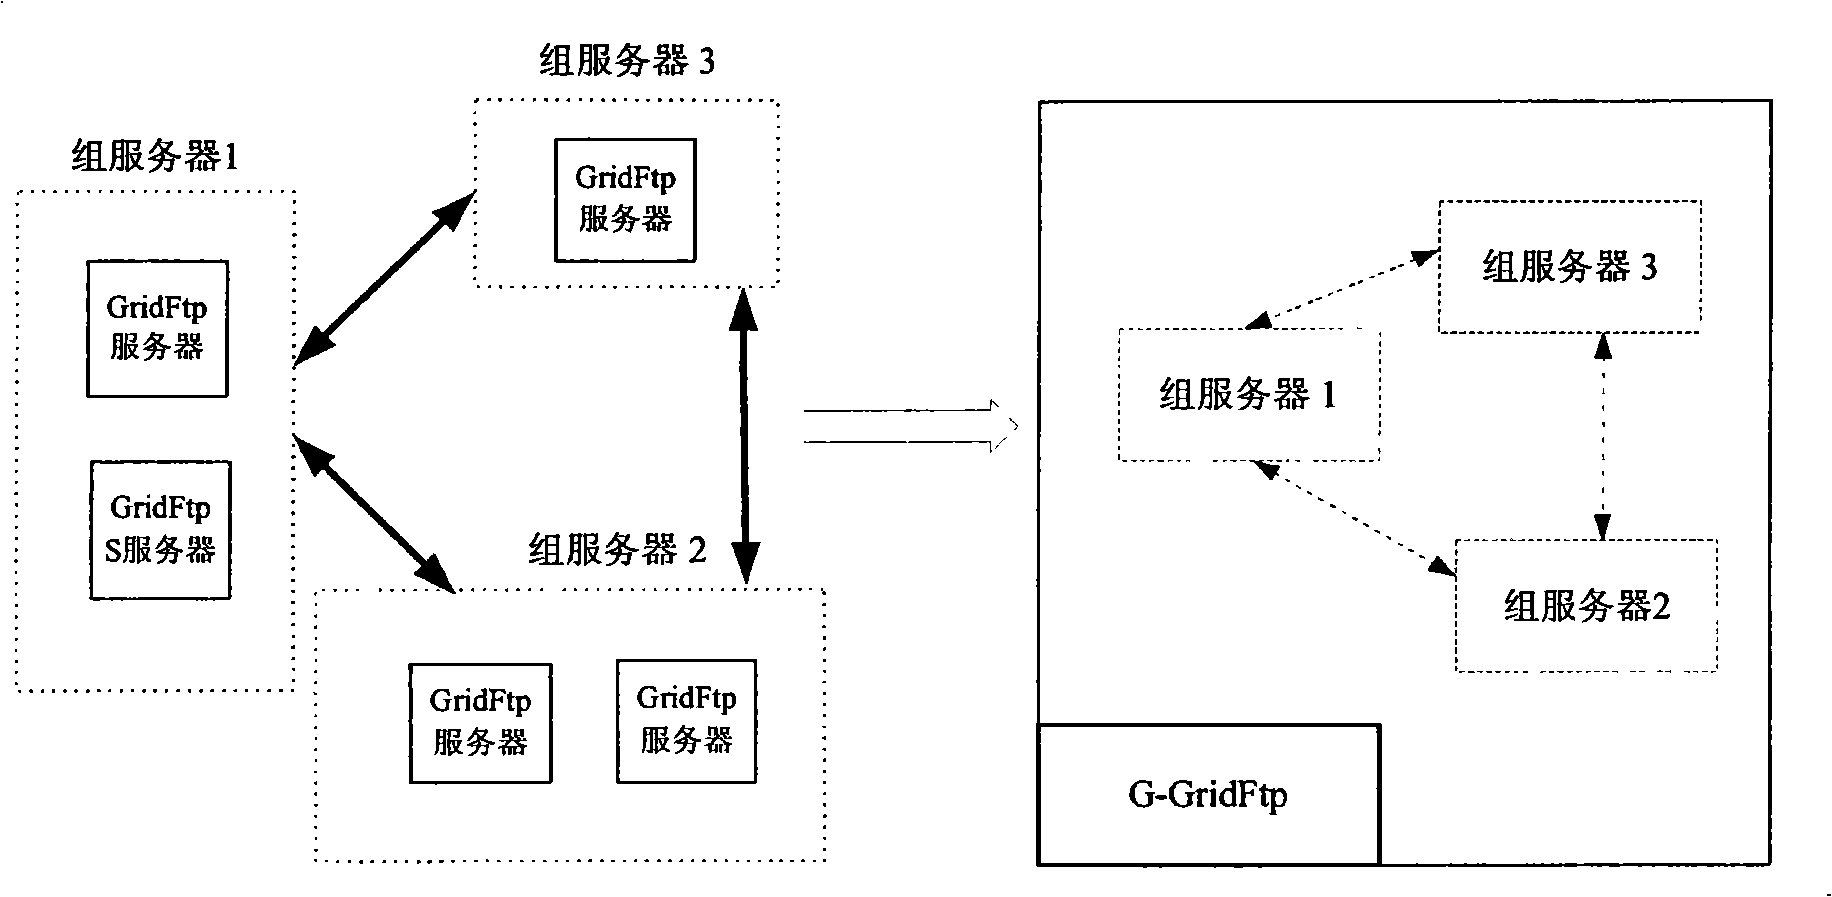 Method for enhancing grid data access performance